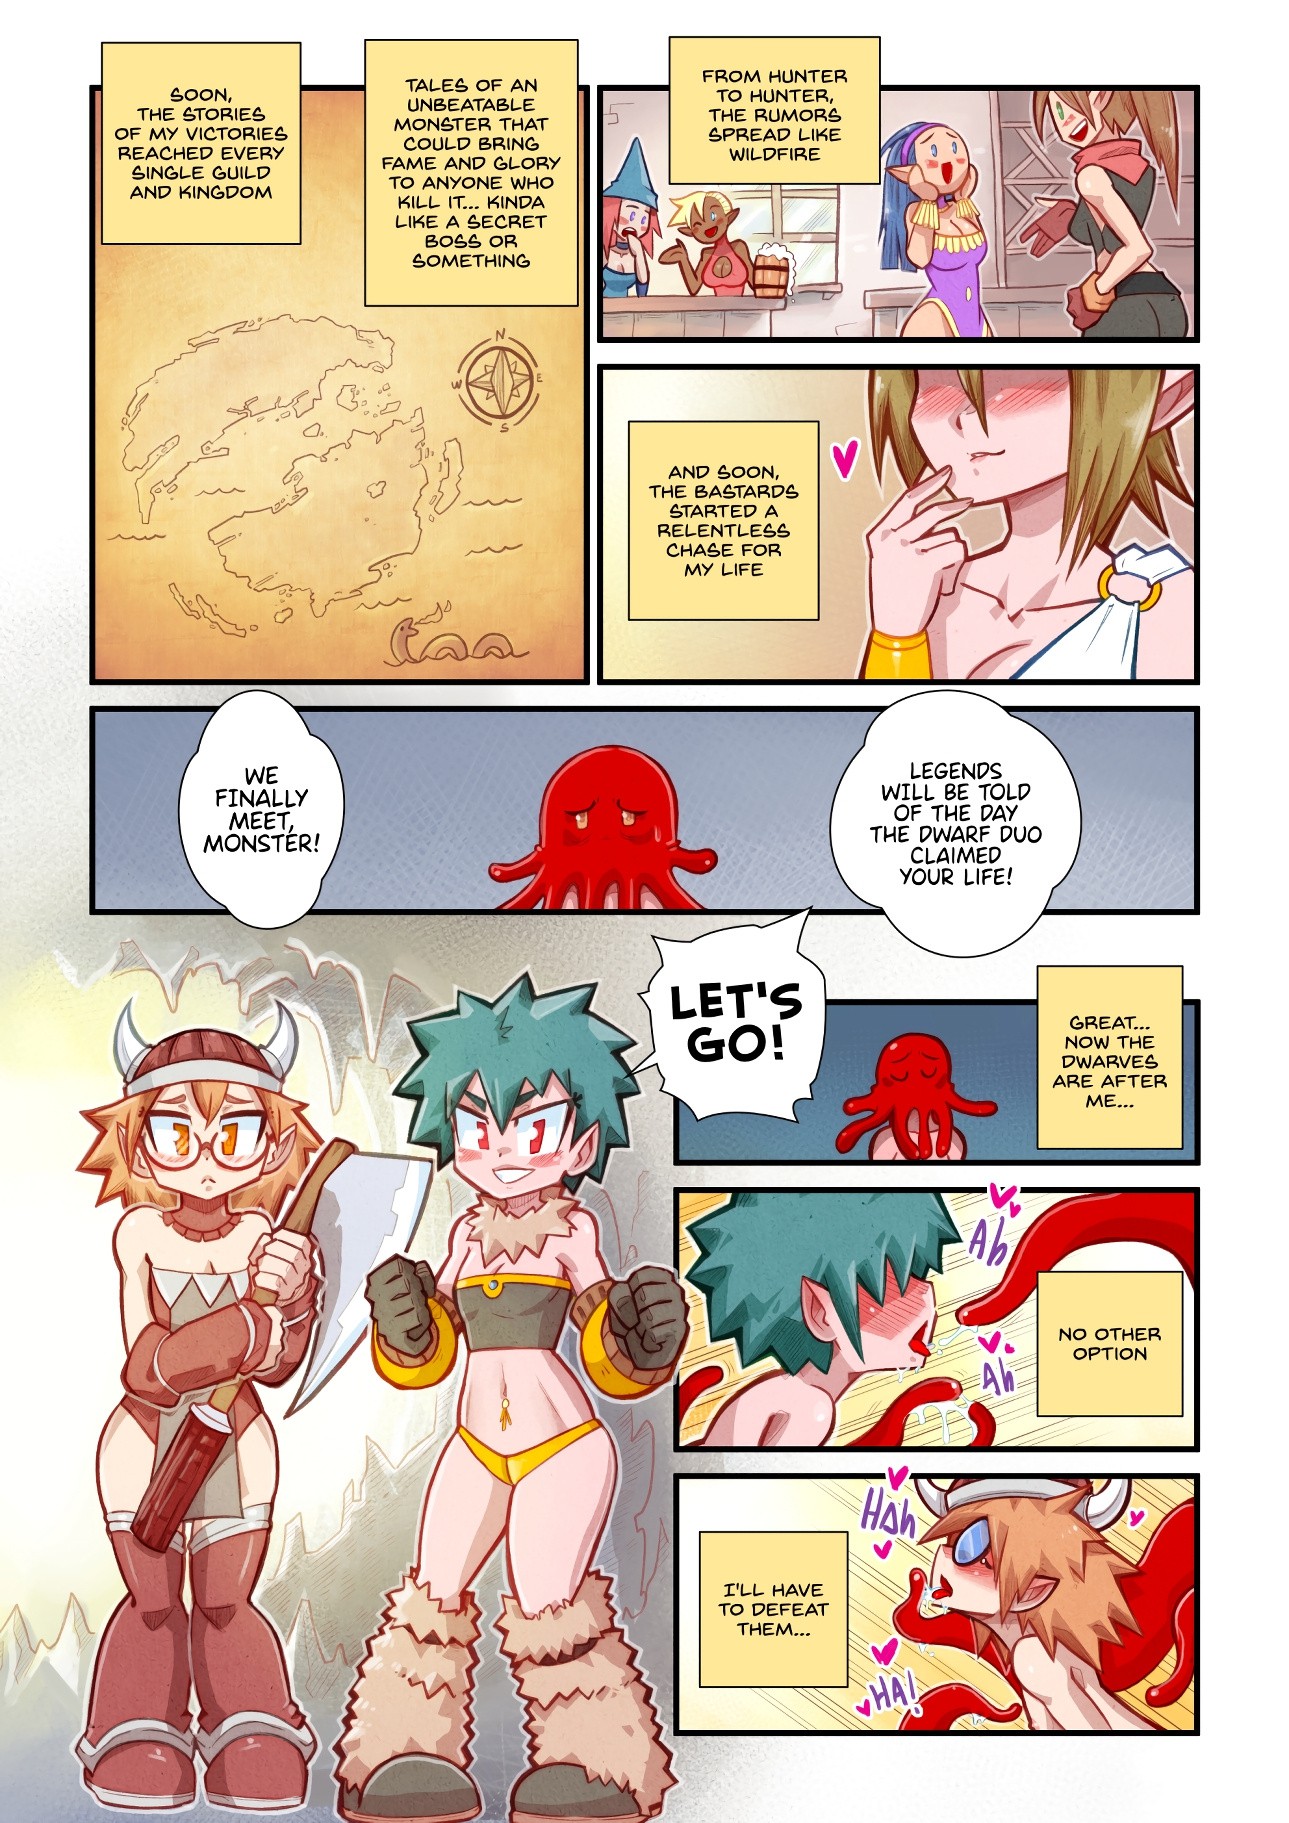 Life as a Tentacle Monster in Another World porn comic picture 10